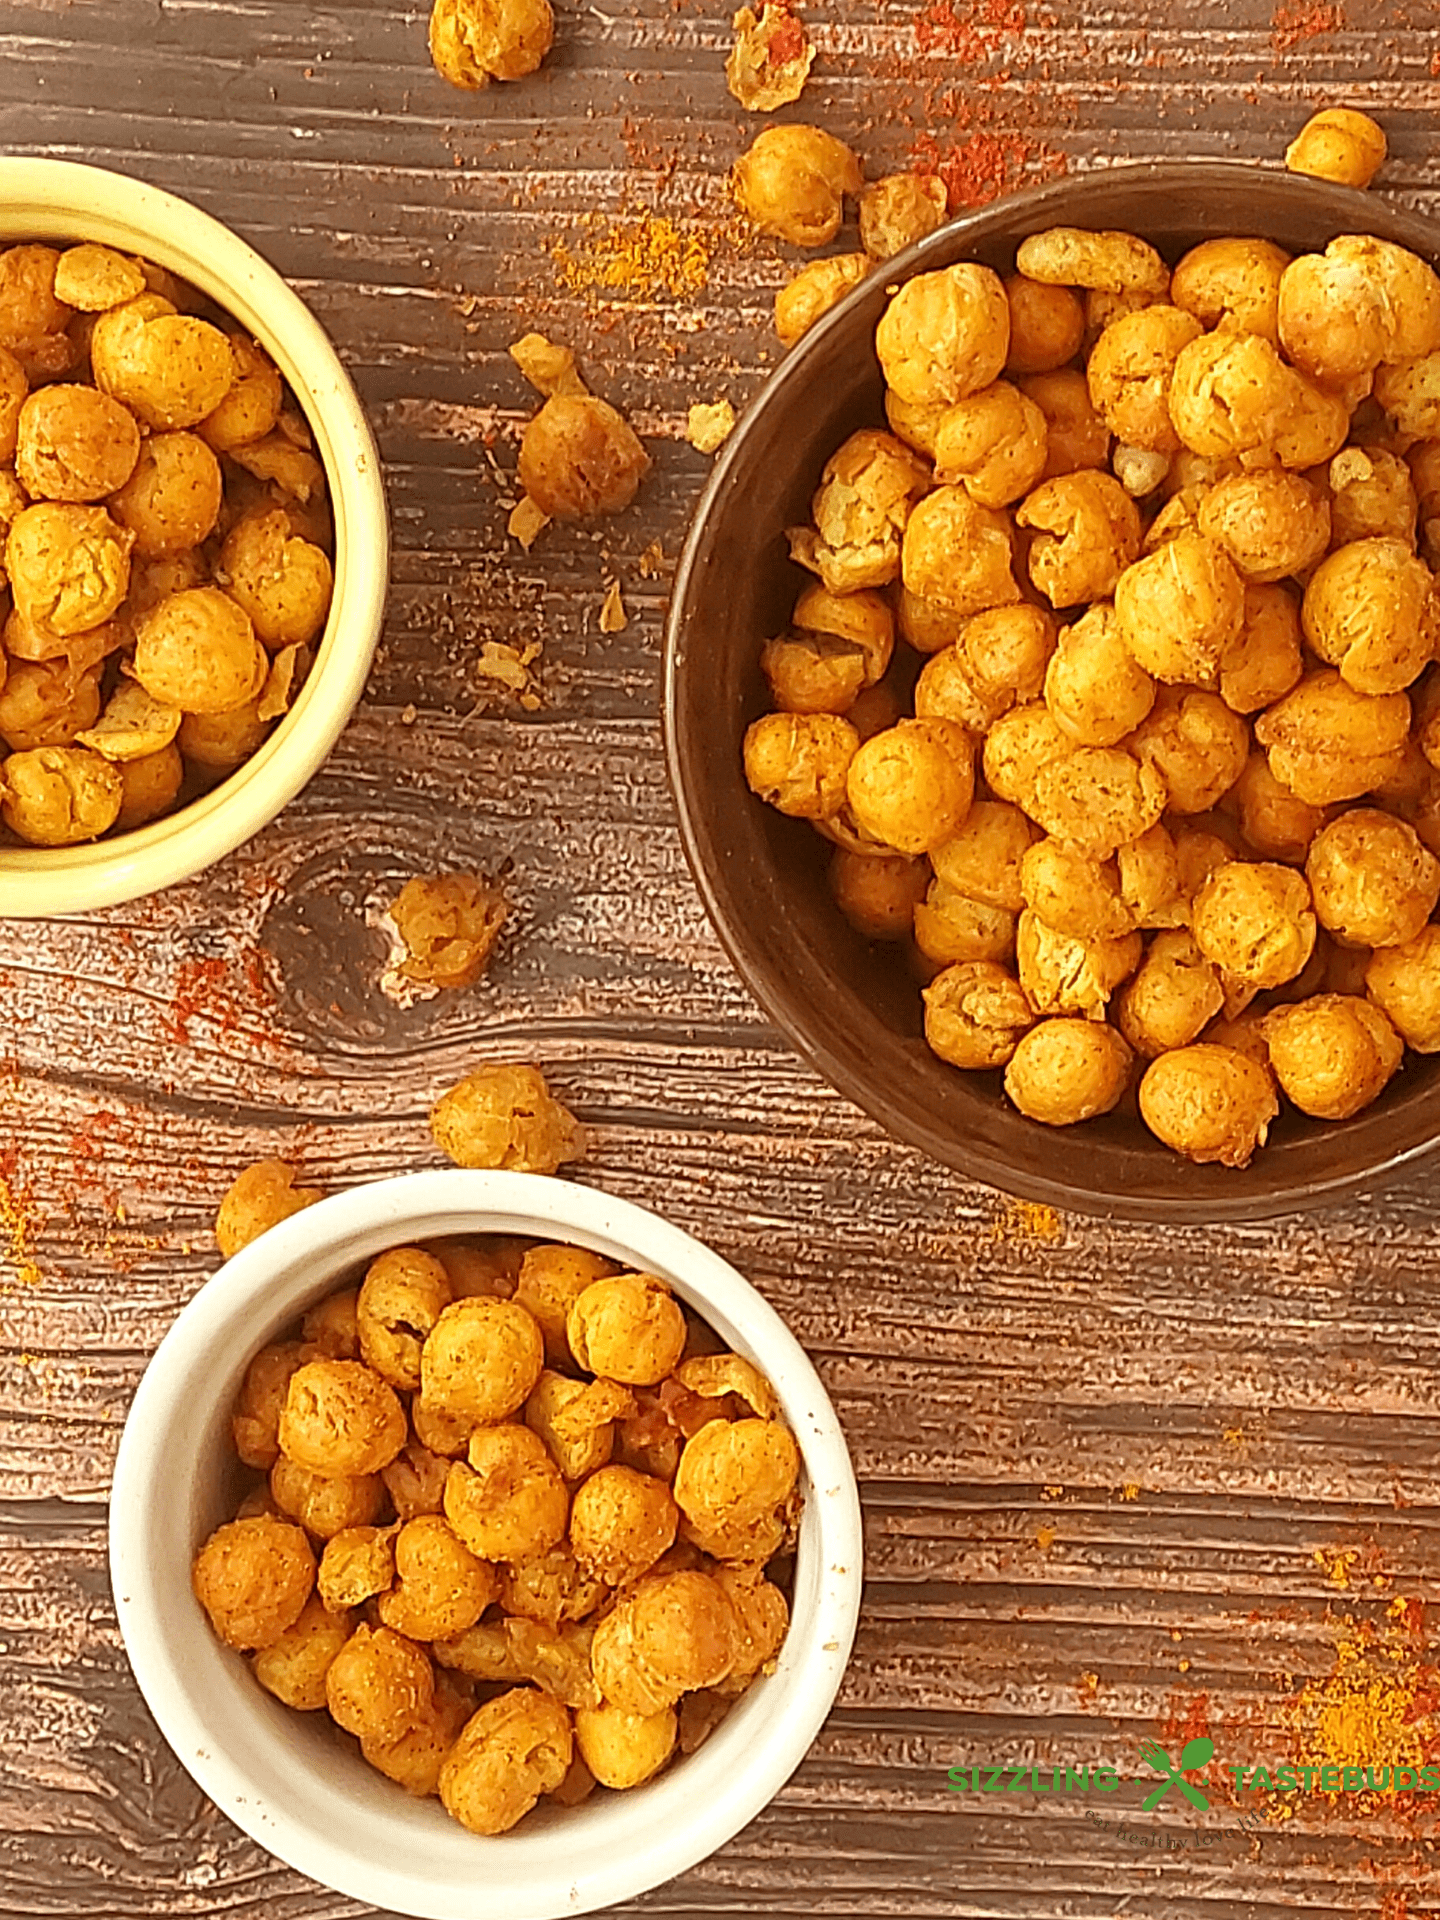 Airfryer Roasted Chickpeas is a quick, delicious, healthy Vegan and Gluten Free snack to make anytime.